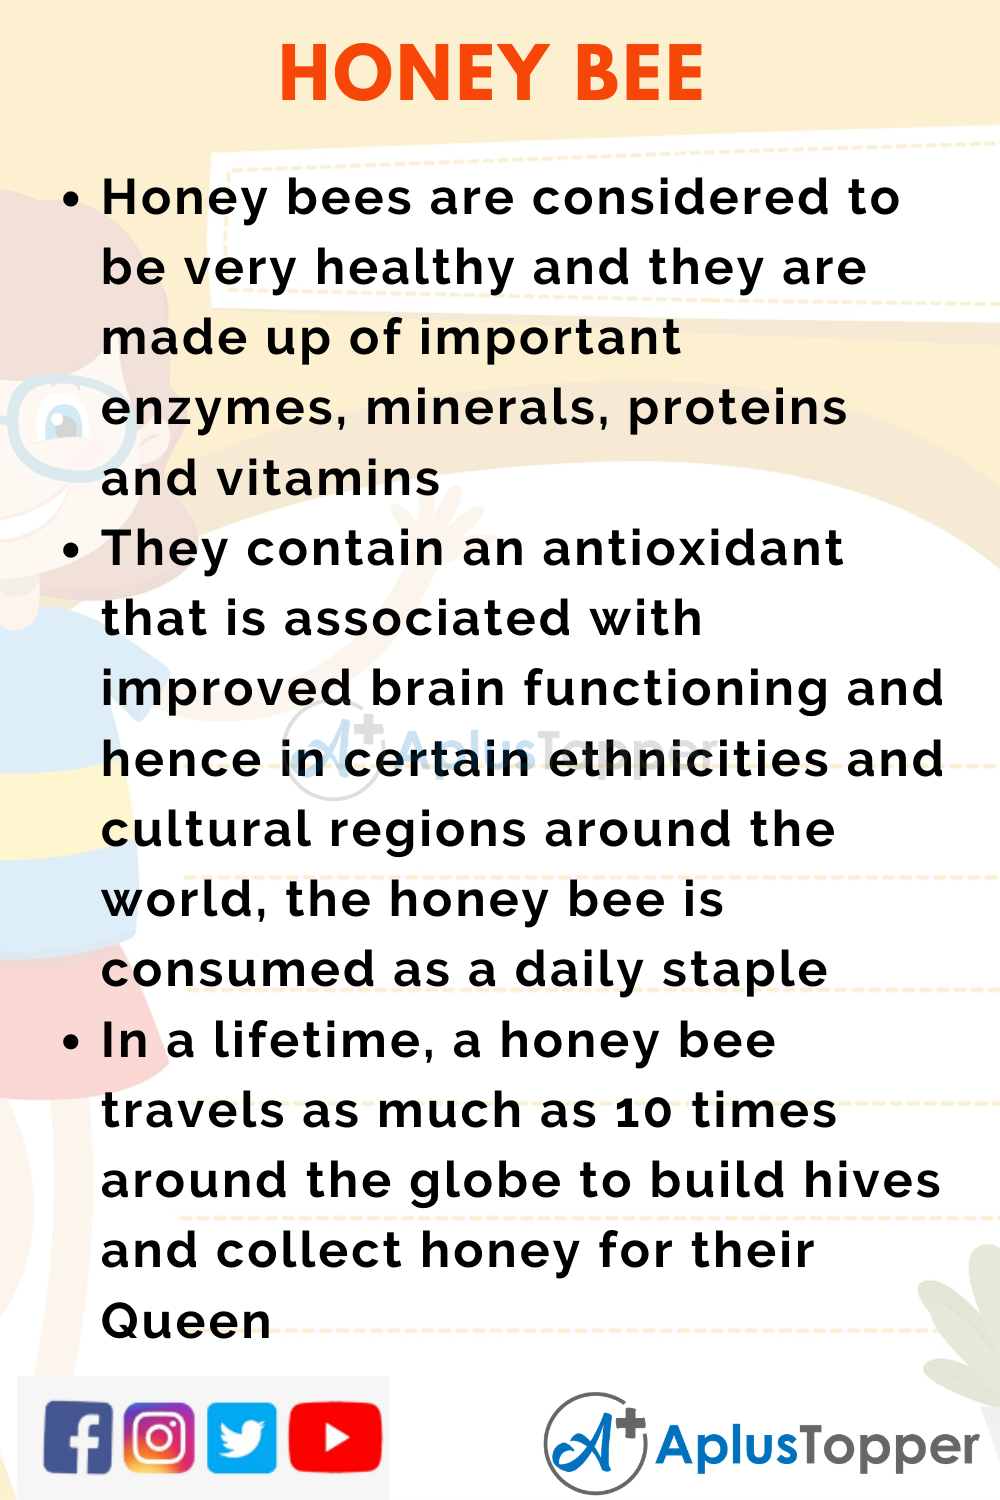 10 Lines on Honey Bee for Higher Class Students